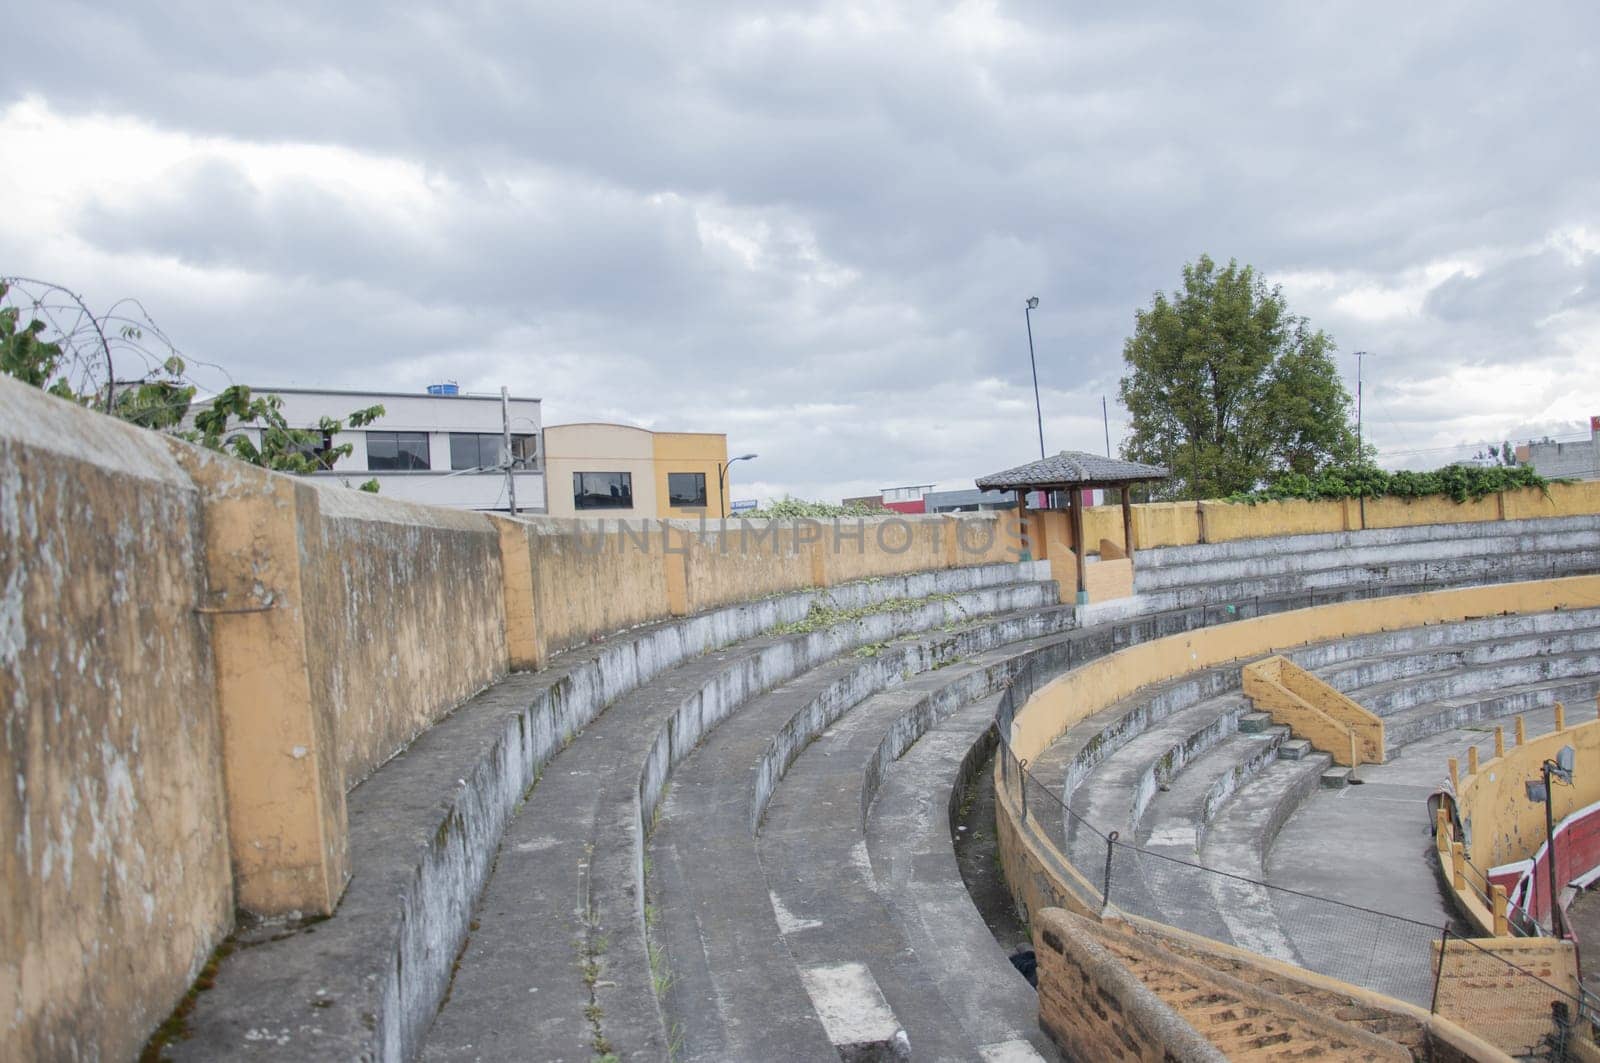 empty amphitheater without people of an abandoned and old bullring by Raulmartin